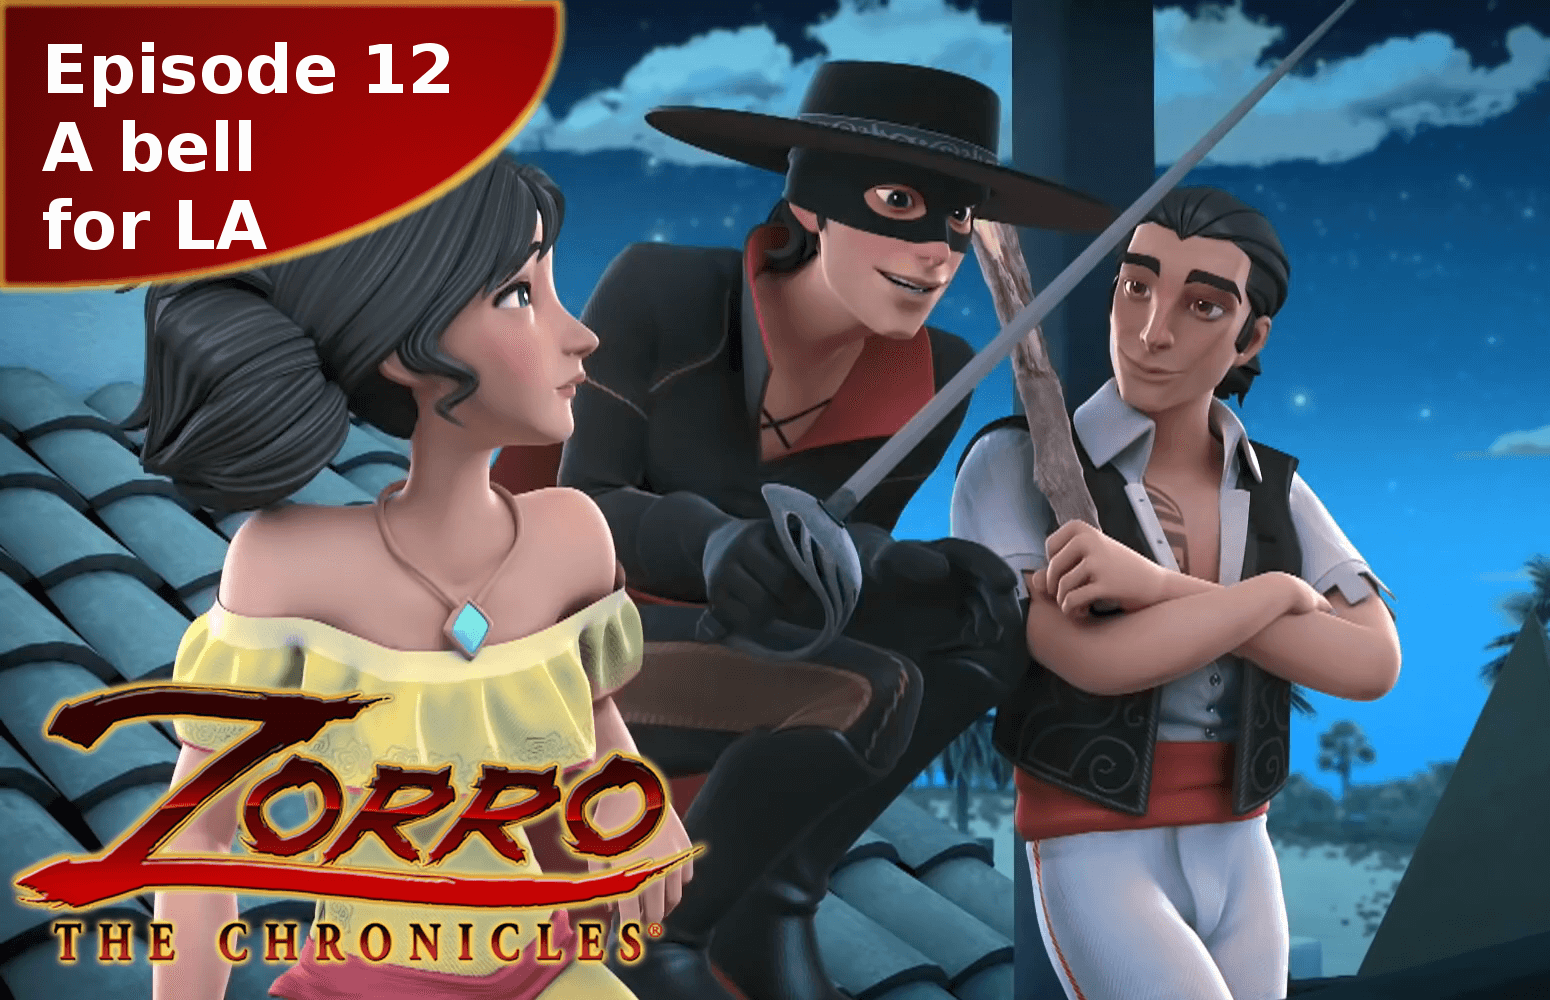 Zorro the Chronicles episode 12 A bell for Los Angeles